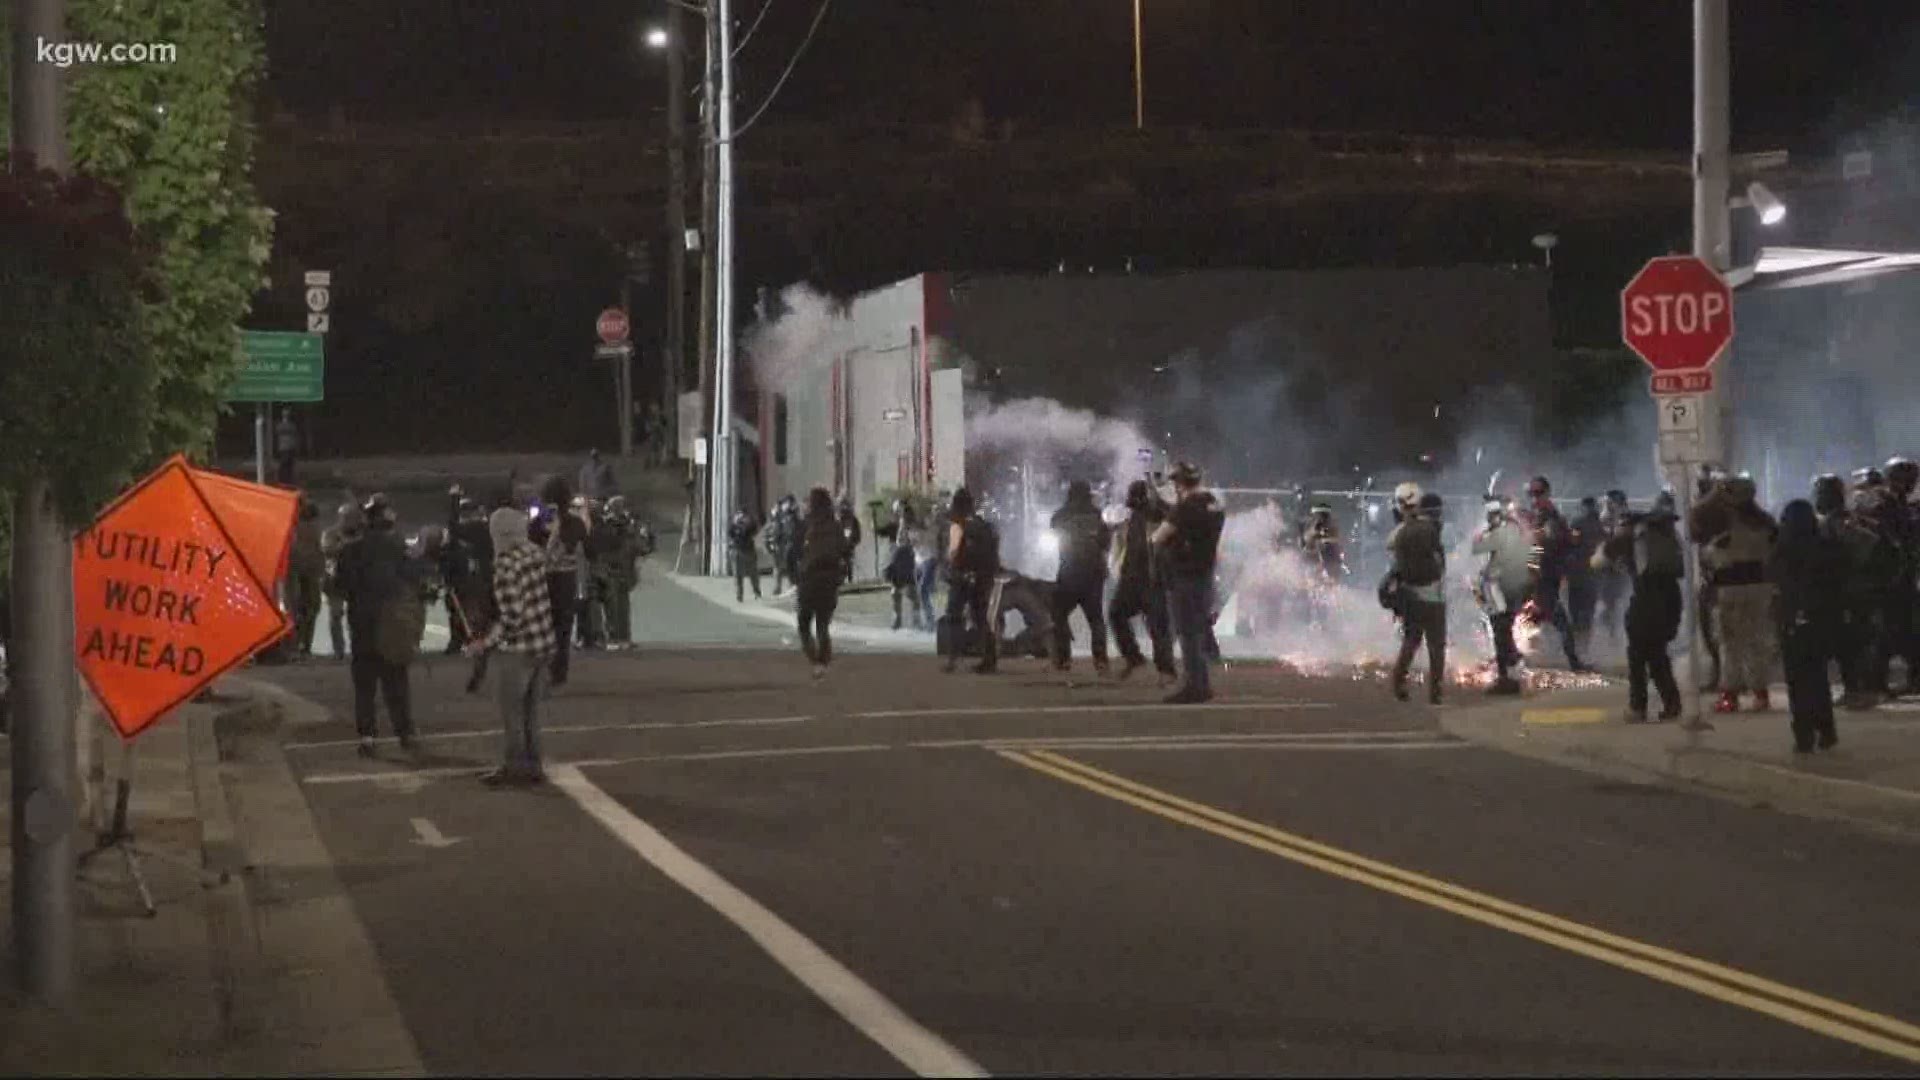 Portland police declared an unlawful assembly and say they arrested 3 people.